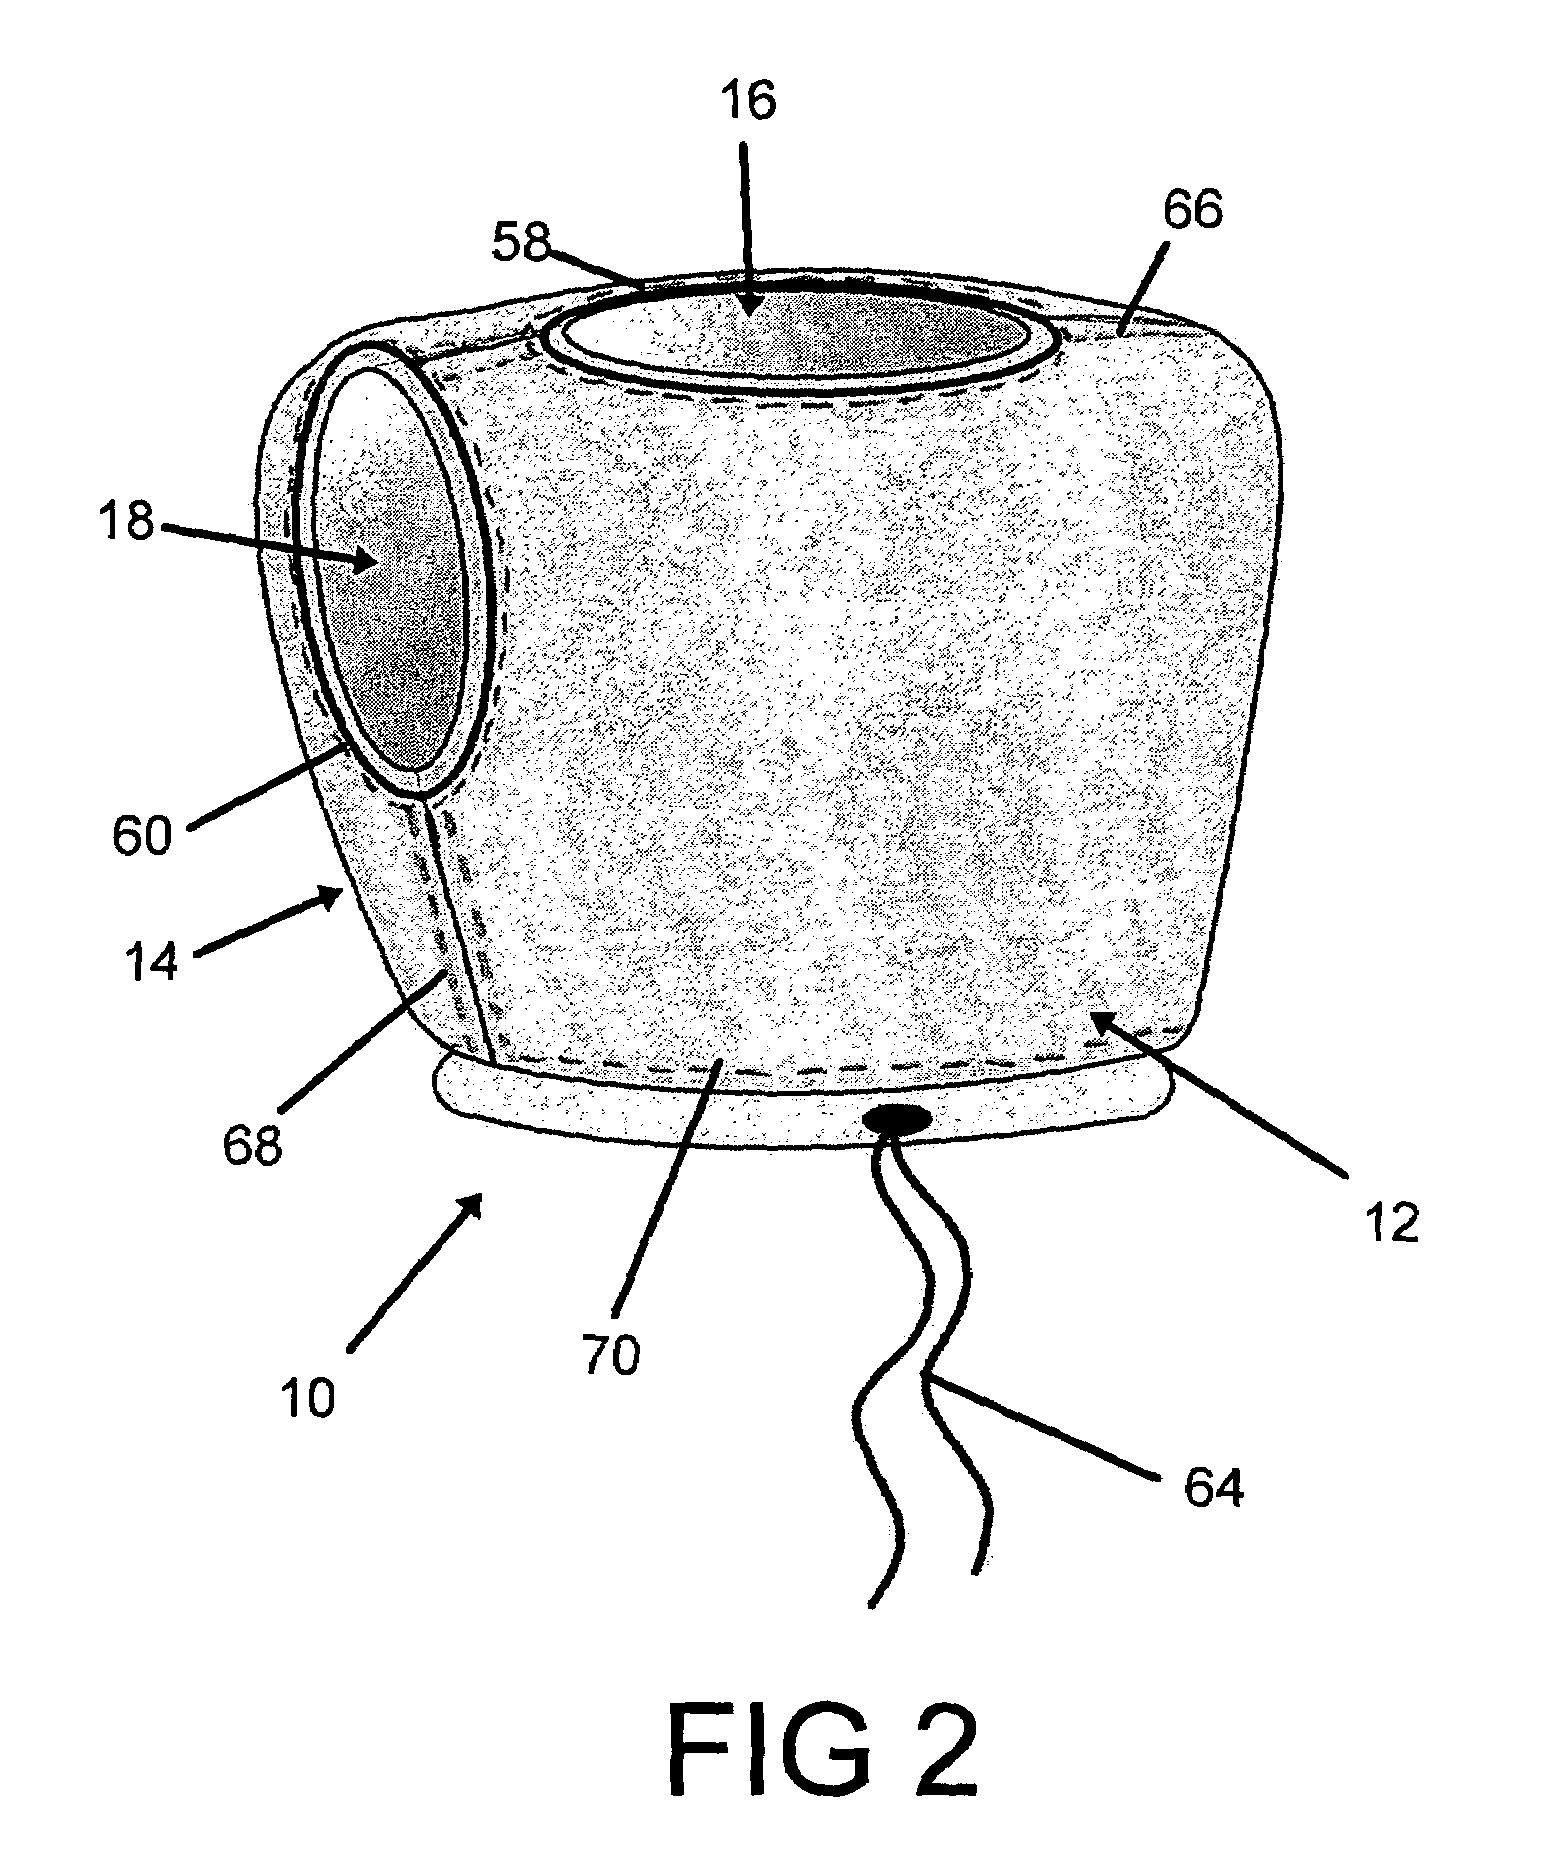 Personal floatation device